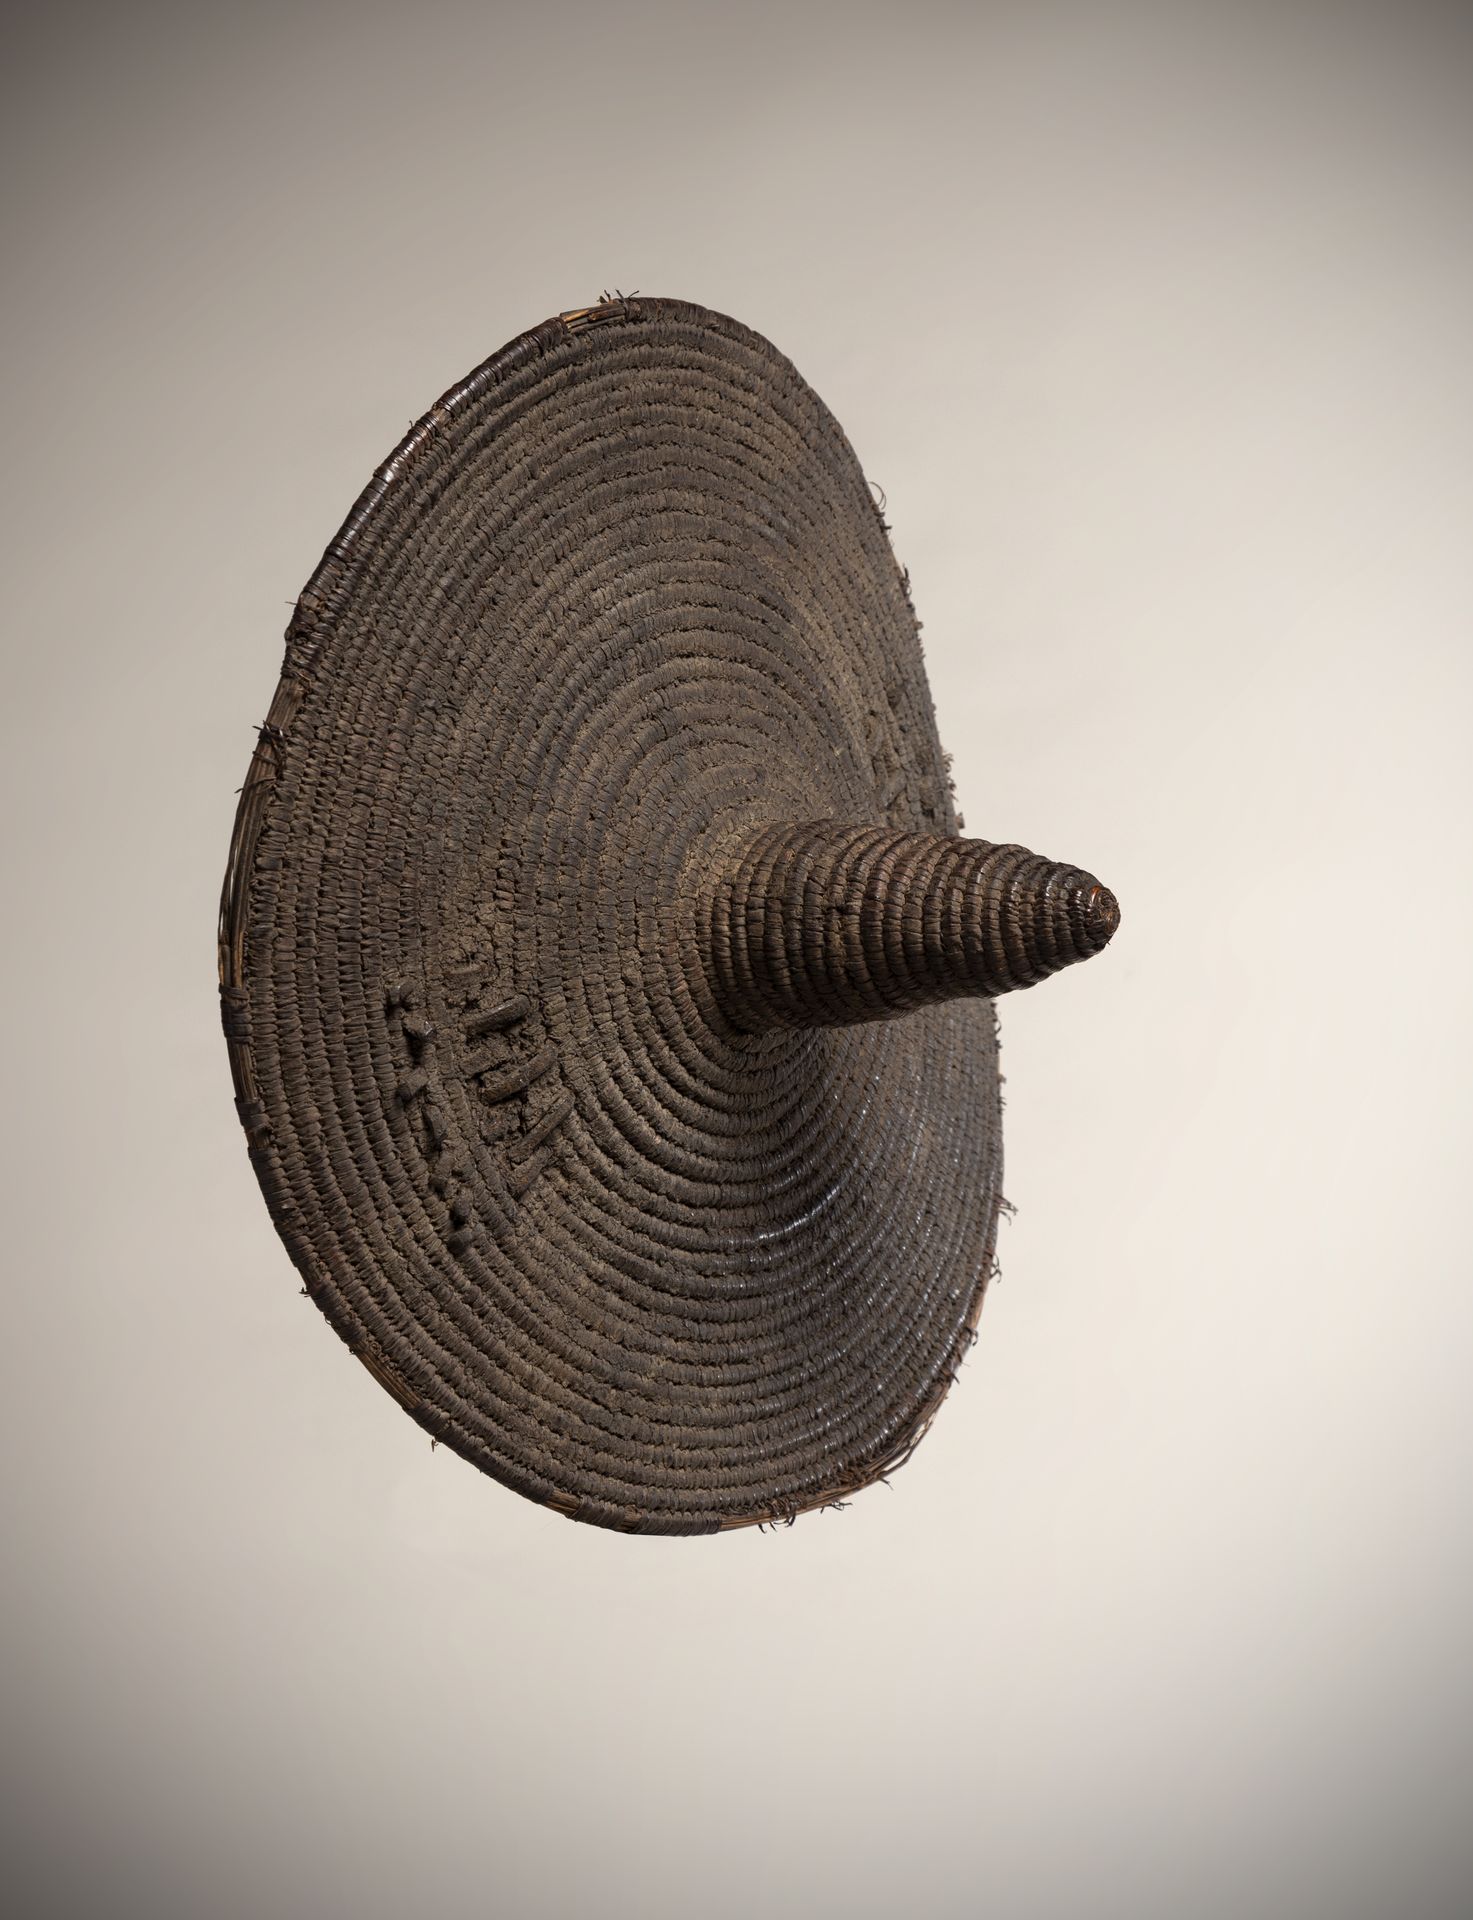 Null TAMBERMA / SOMBA (Benin)

Basketry shield with conical tip and leather hand&hellip;